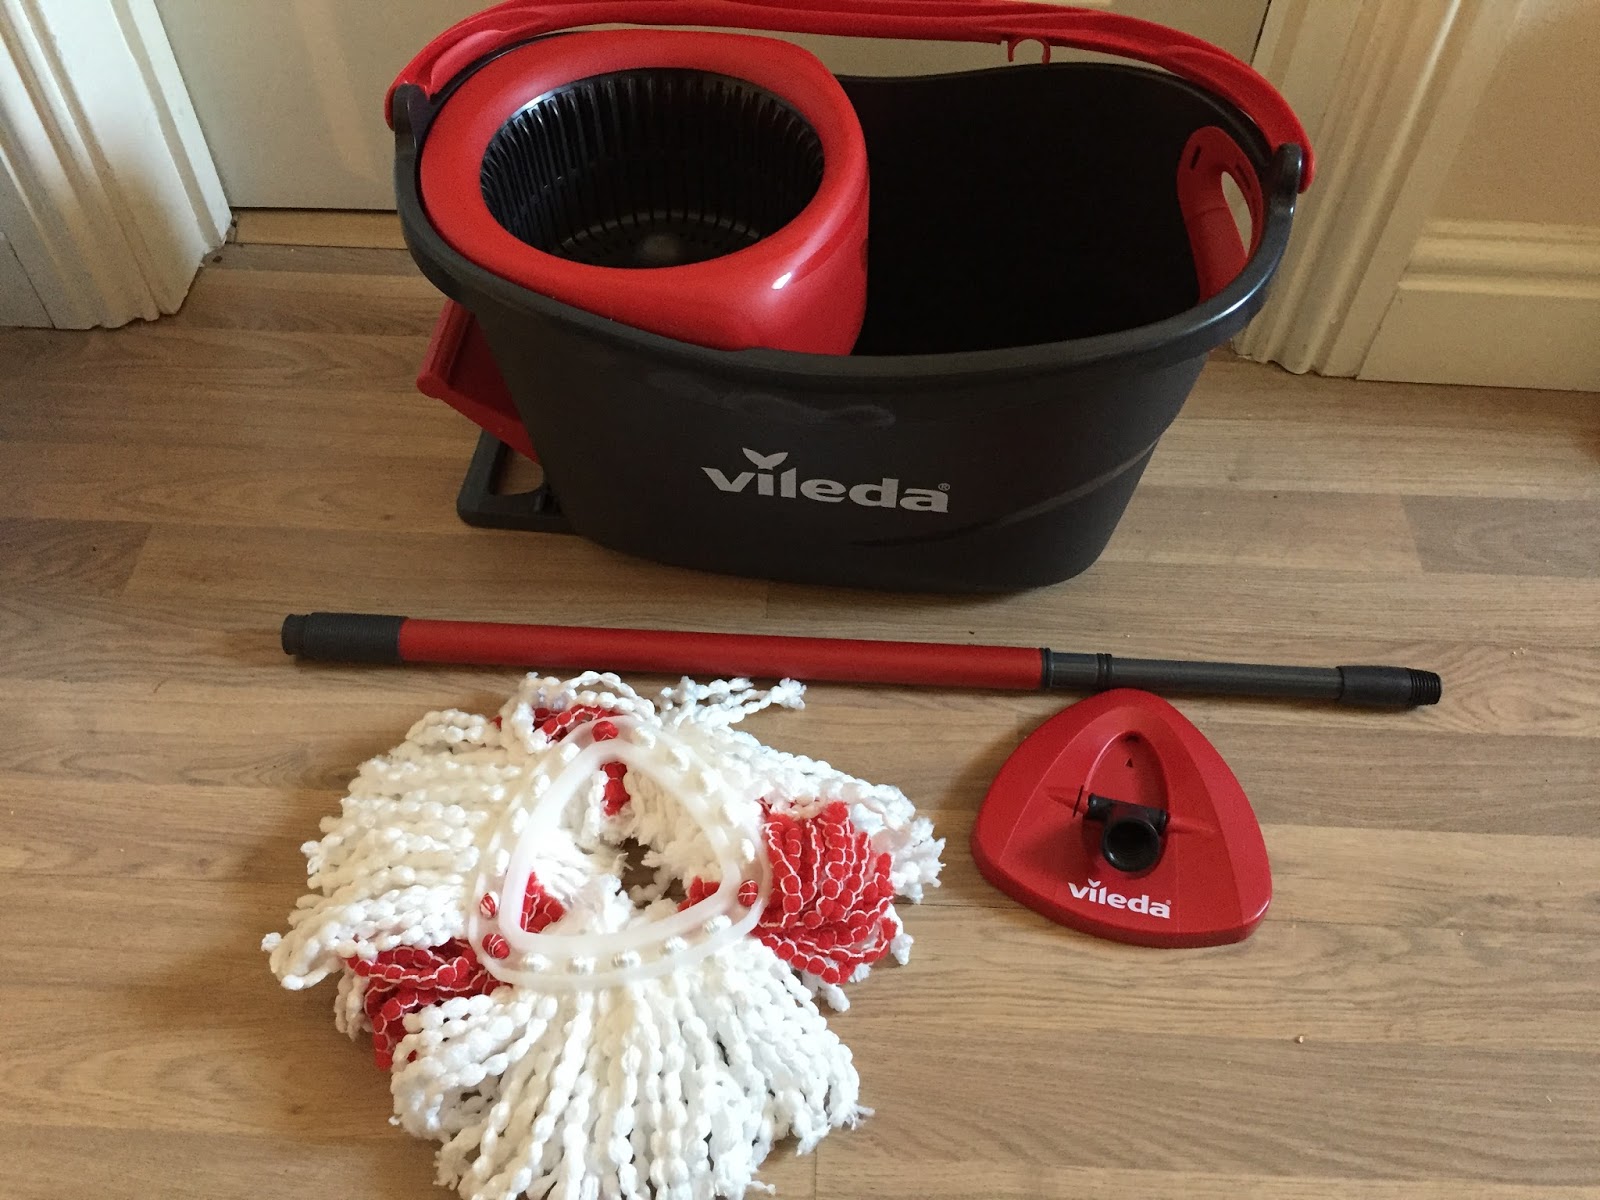 Vileda Easy Wring Clean Turbo mop and (review) - Steph's Two Girls